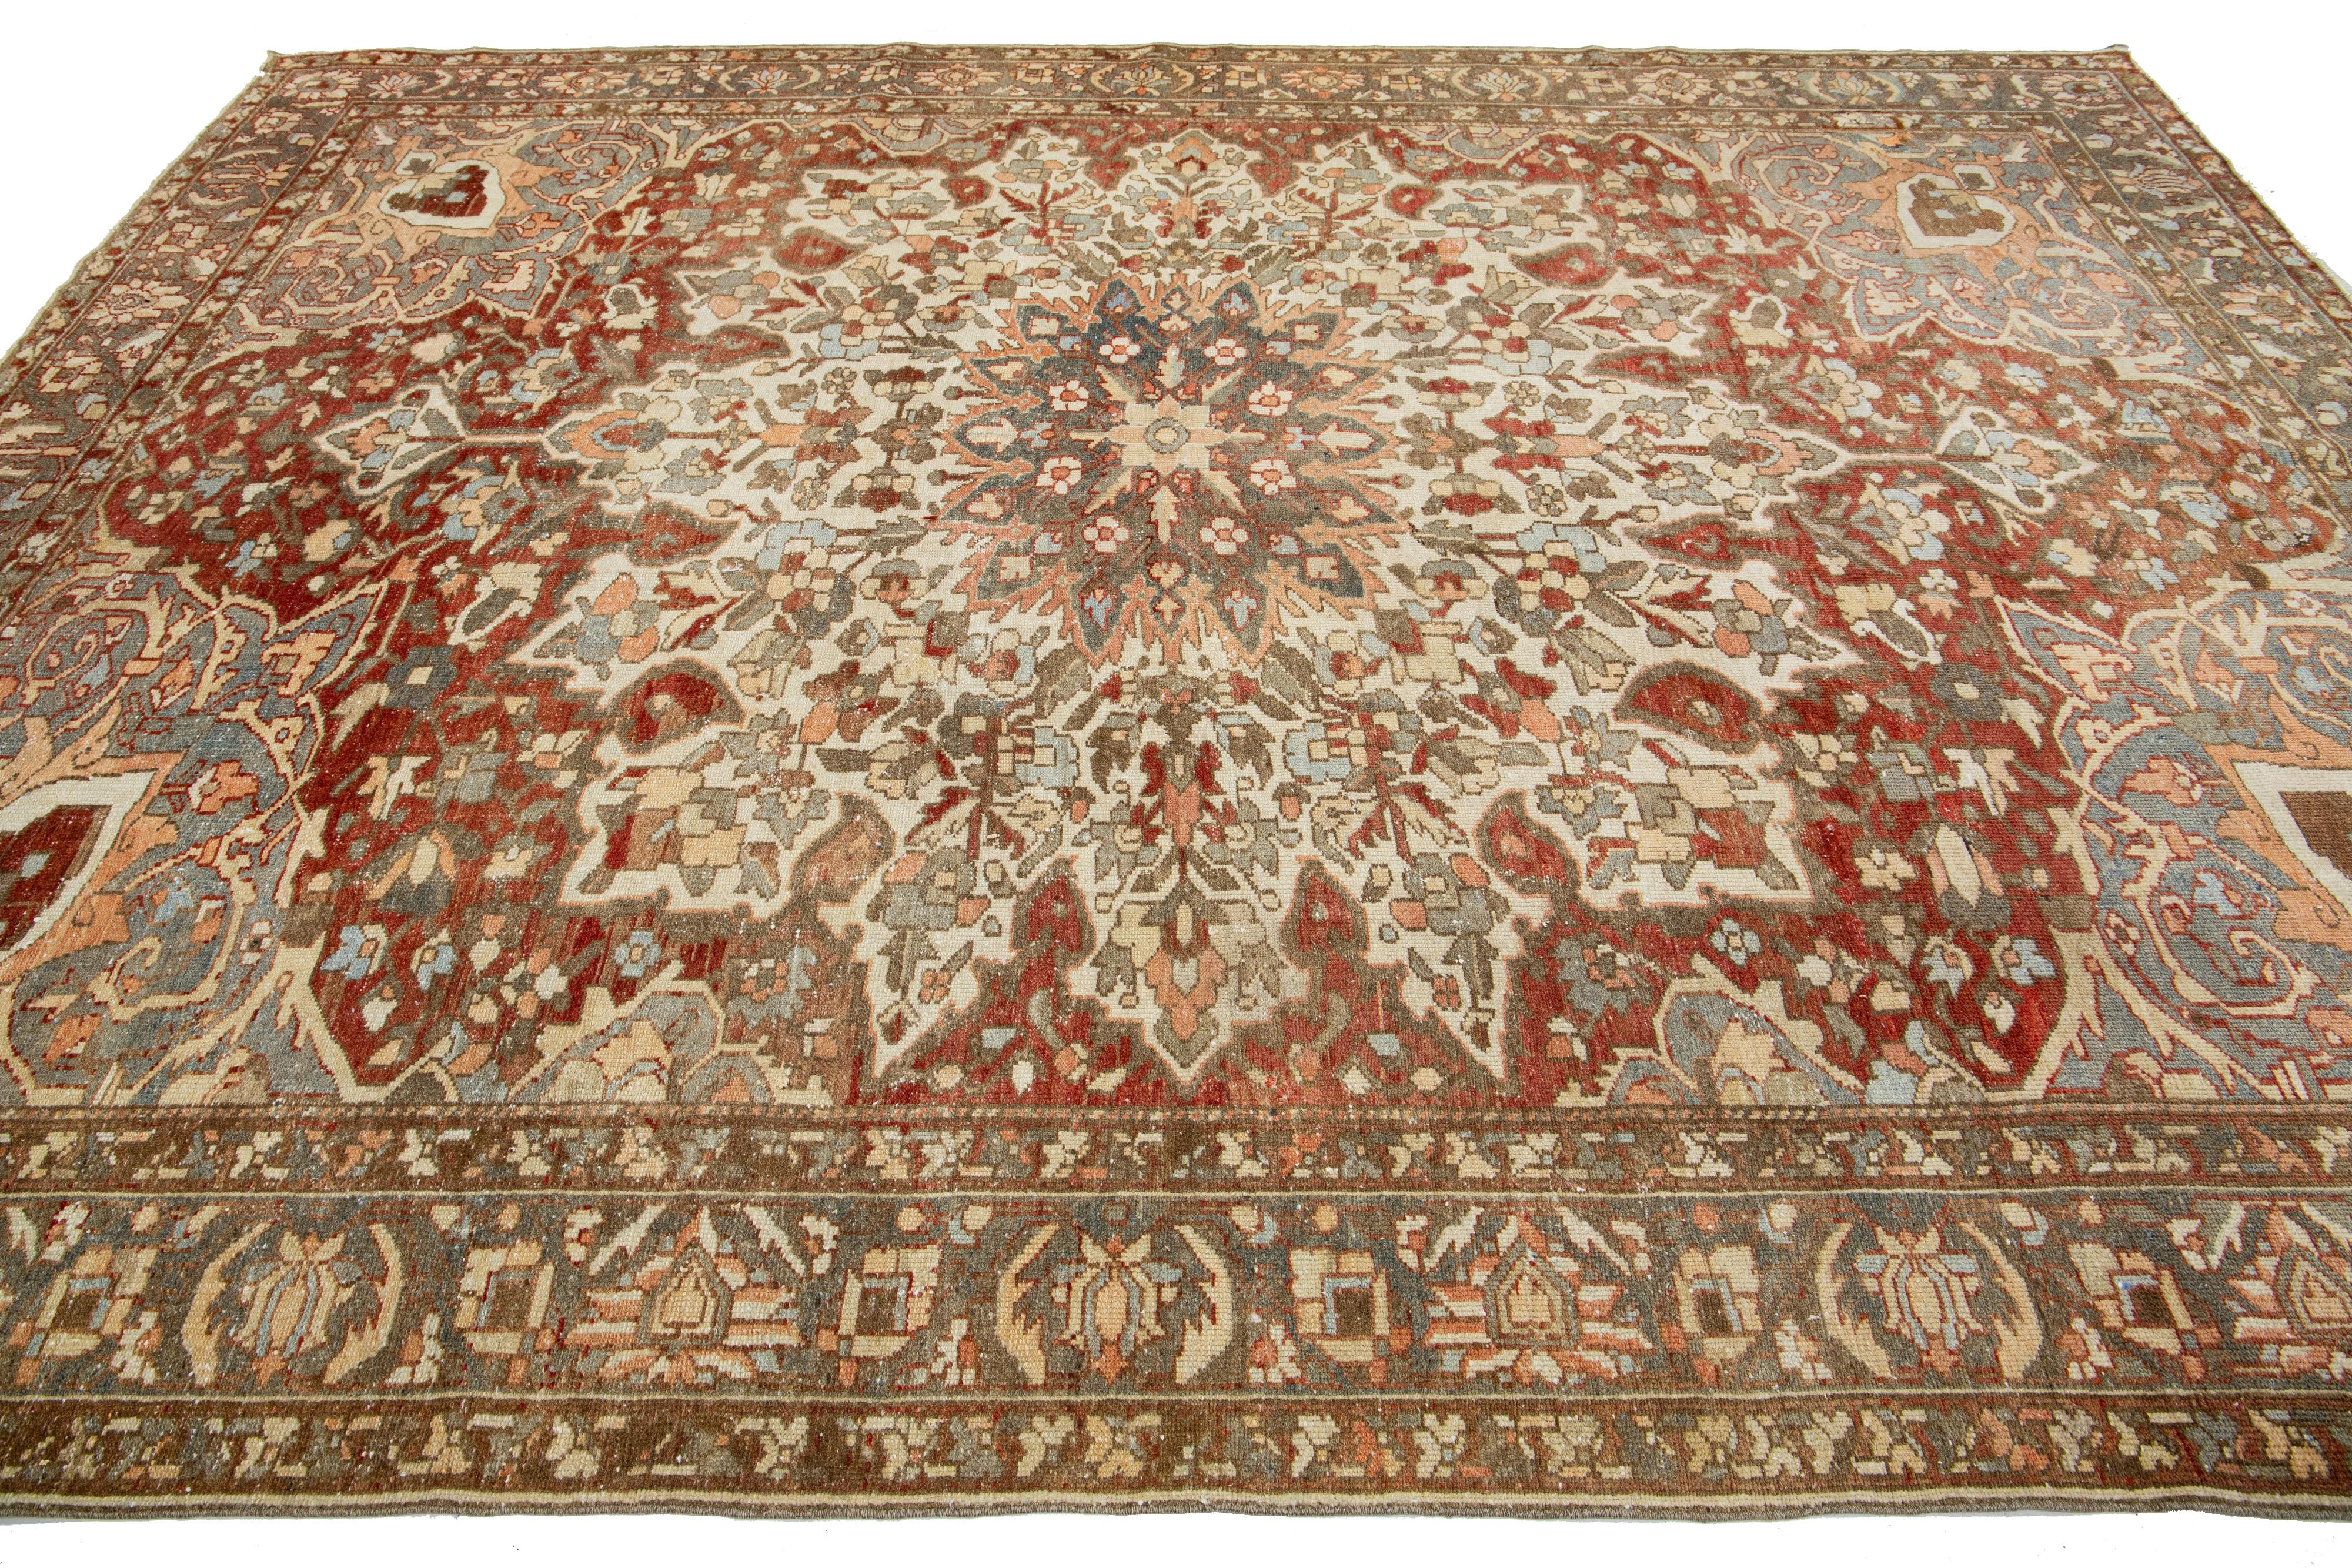 Rosette Designed Antique Persian Bakhtiari Red Wool Rug  In Good Condition For Sale In Norwalk, CT